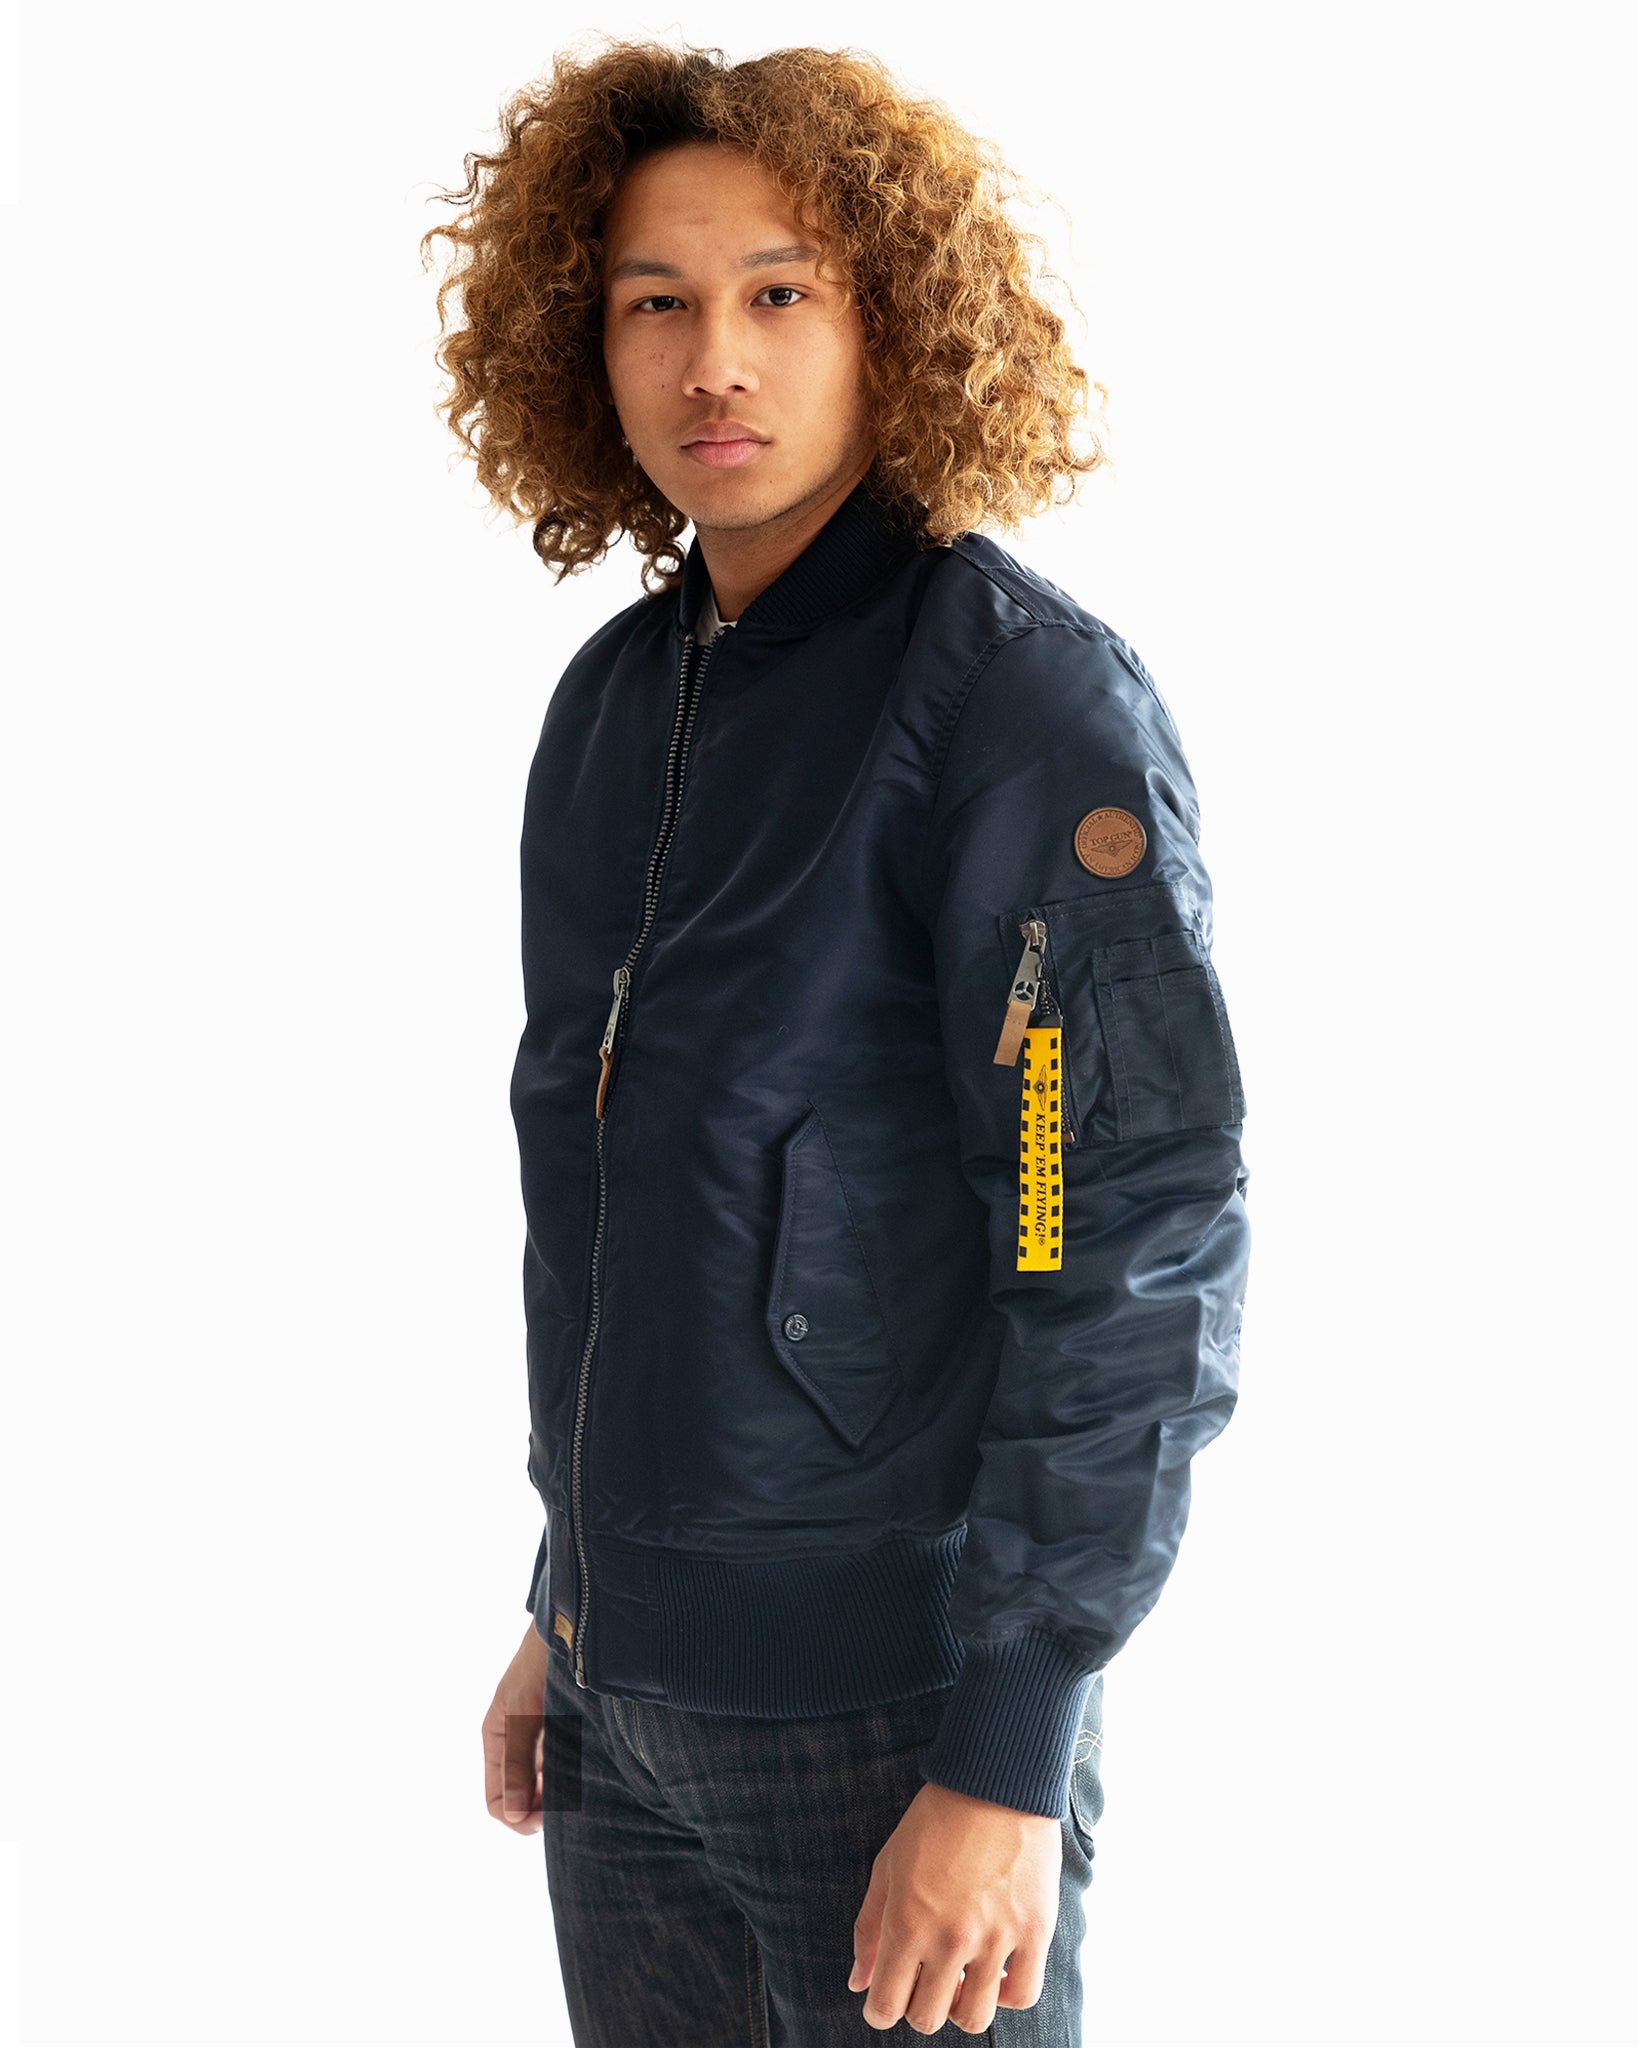 HOODIE WITH NYLON MA-1 Store JACKET GUN® Top – TOP EDITI BOMBER Gun (LIMITED REMOVABLE